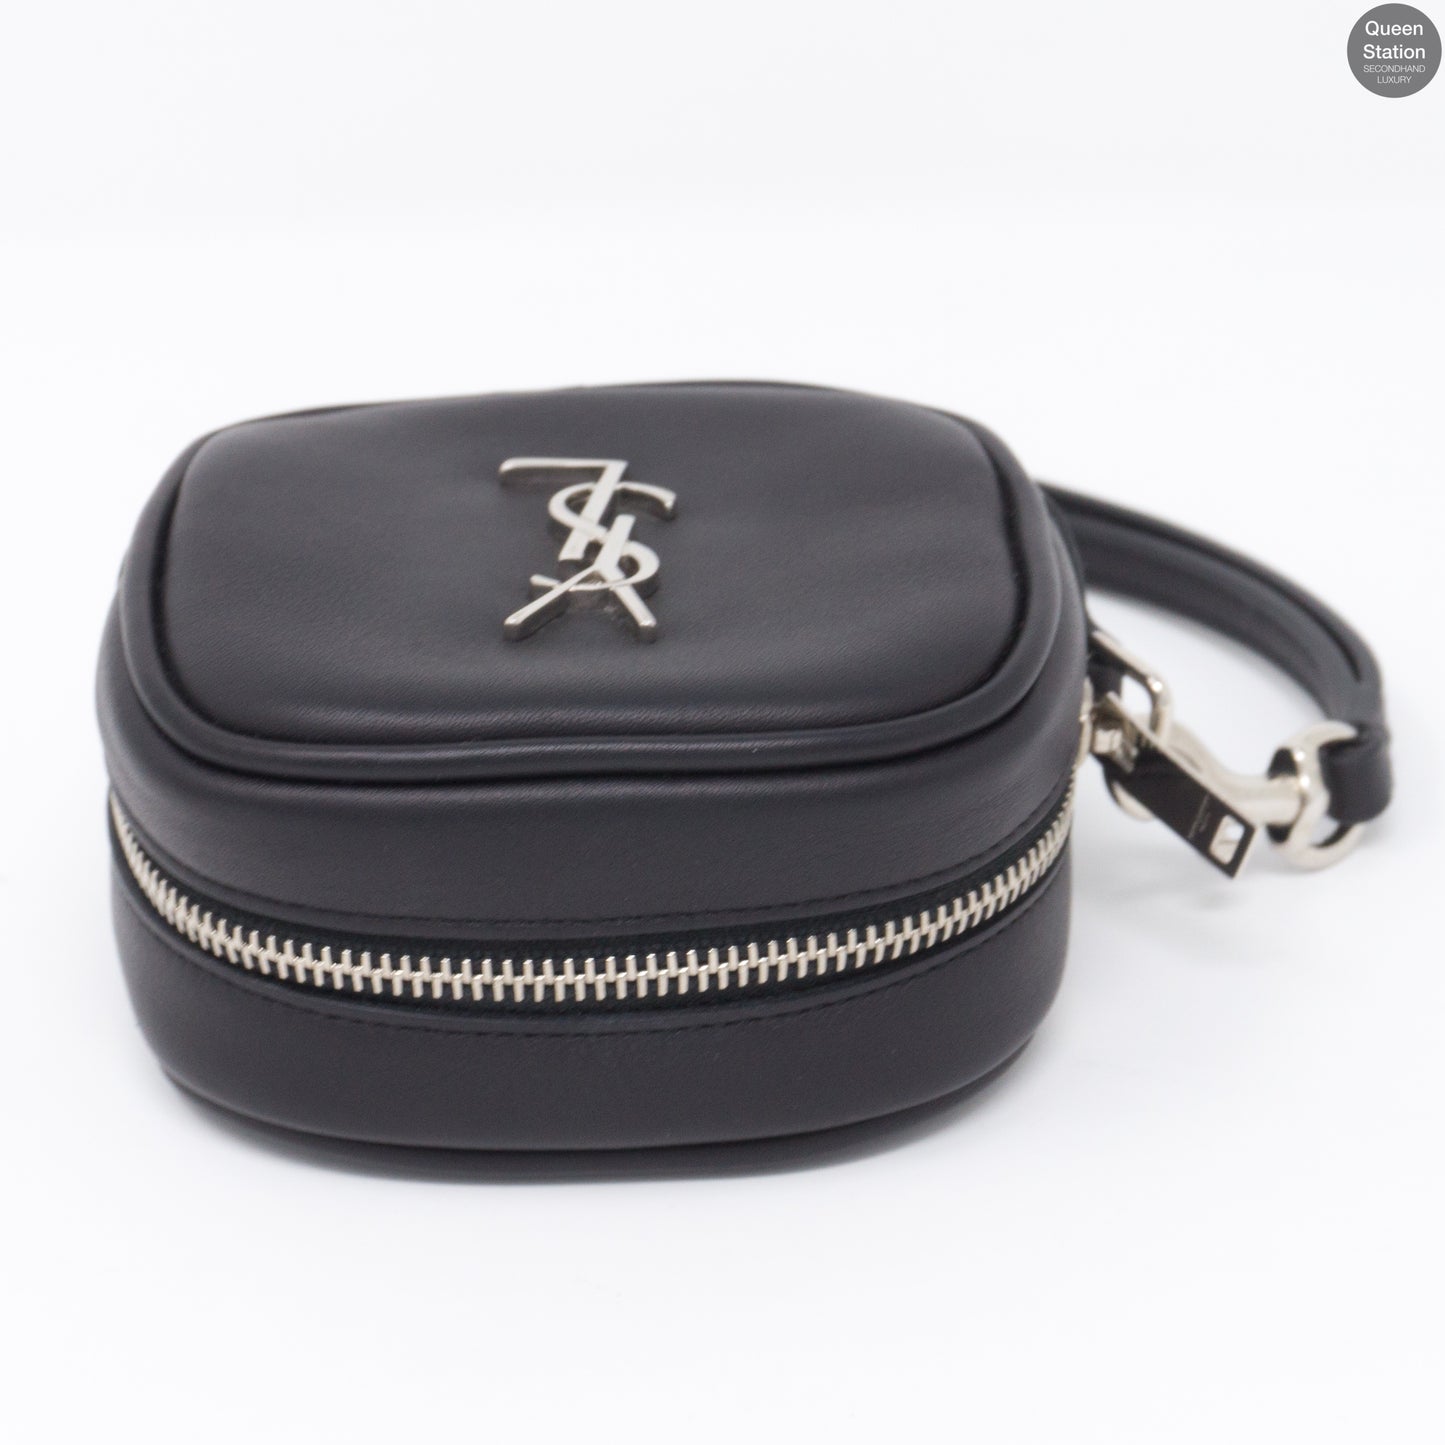 Monogrammed Black Leather Key Pouch